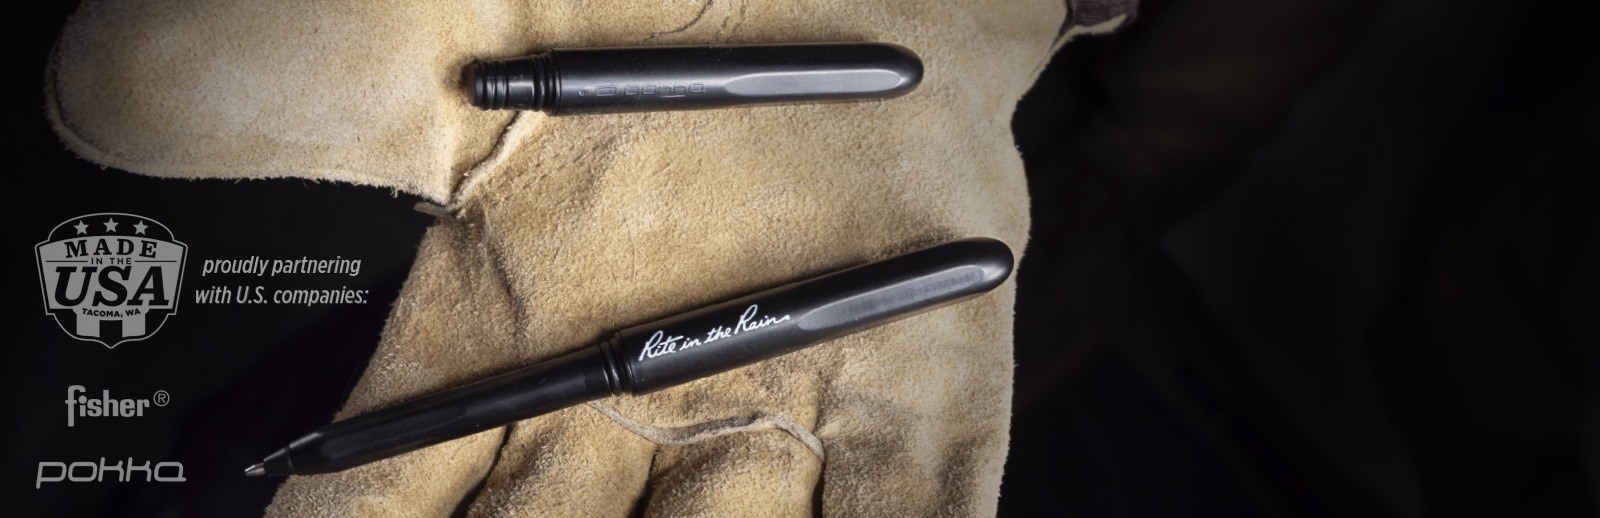 Rite in the Rain All-Weather Pocket Pen with Cap